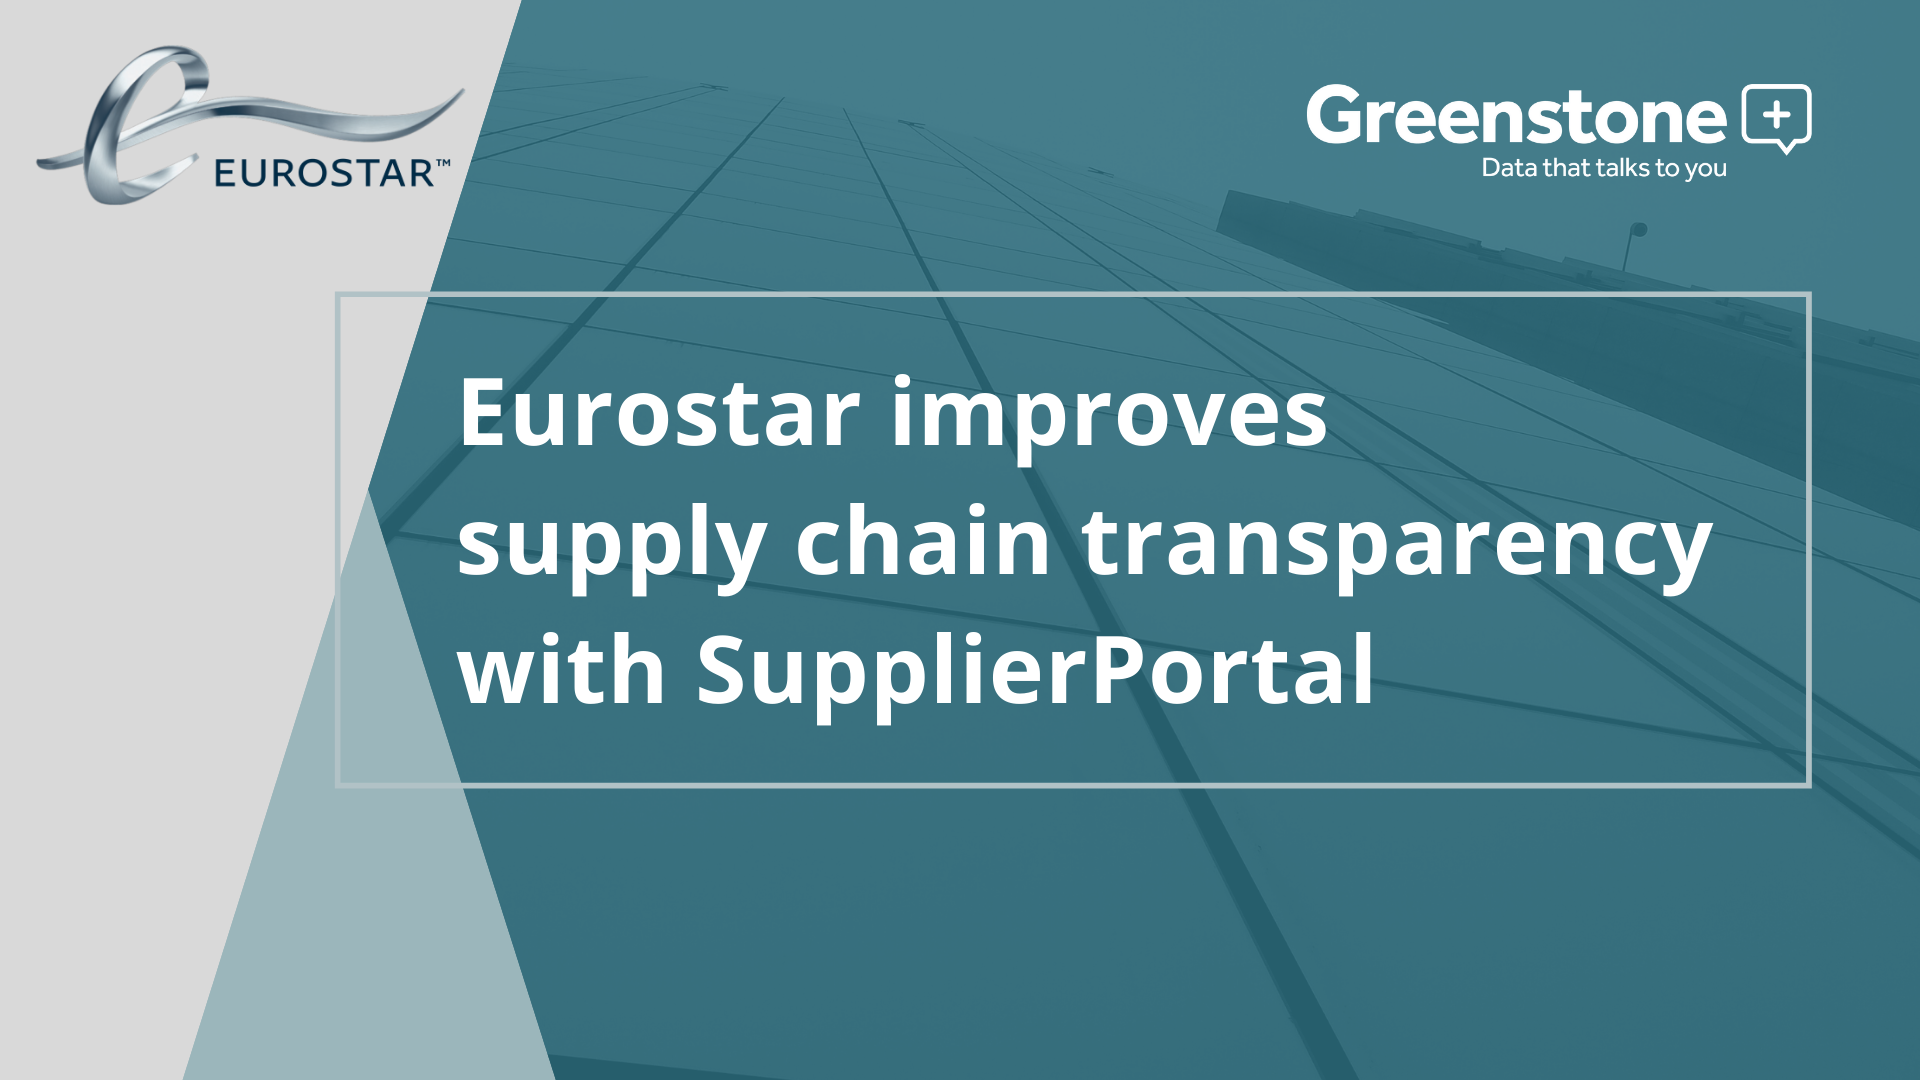 Eurostar improves supply chain transparency with SupplierPortal - case study